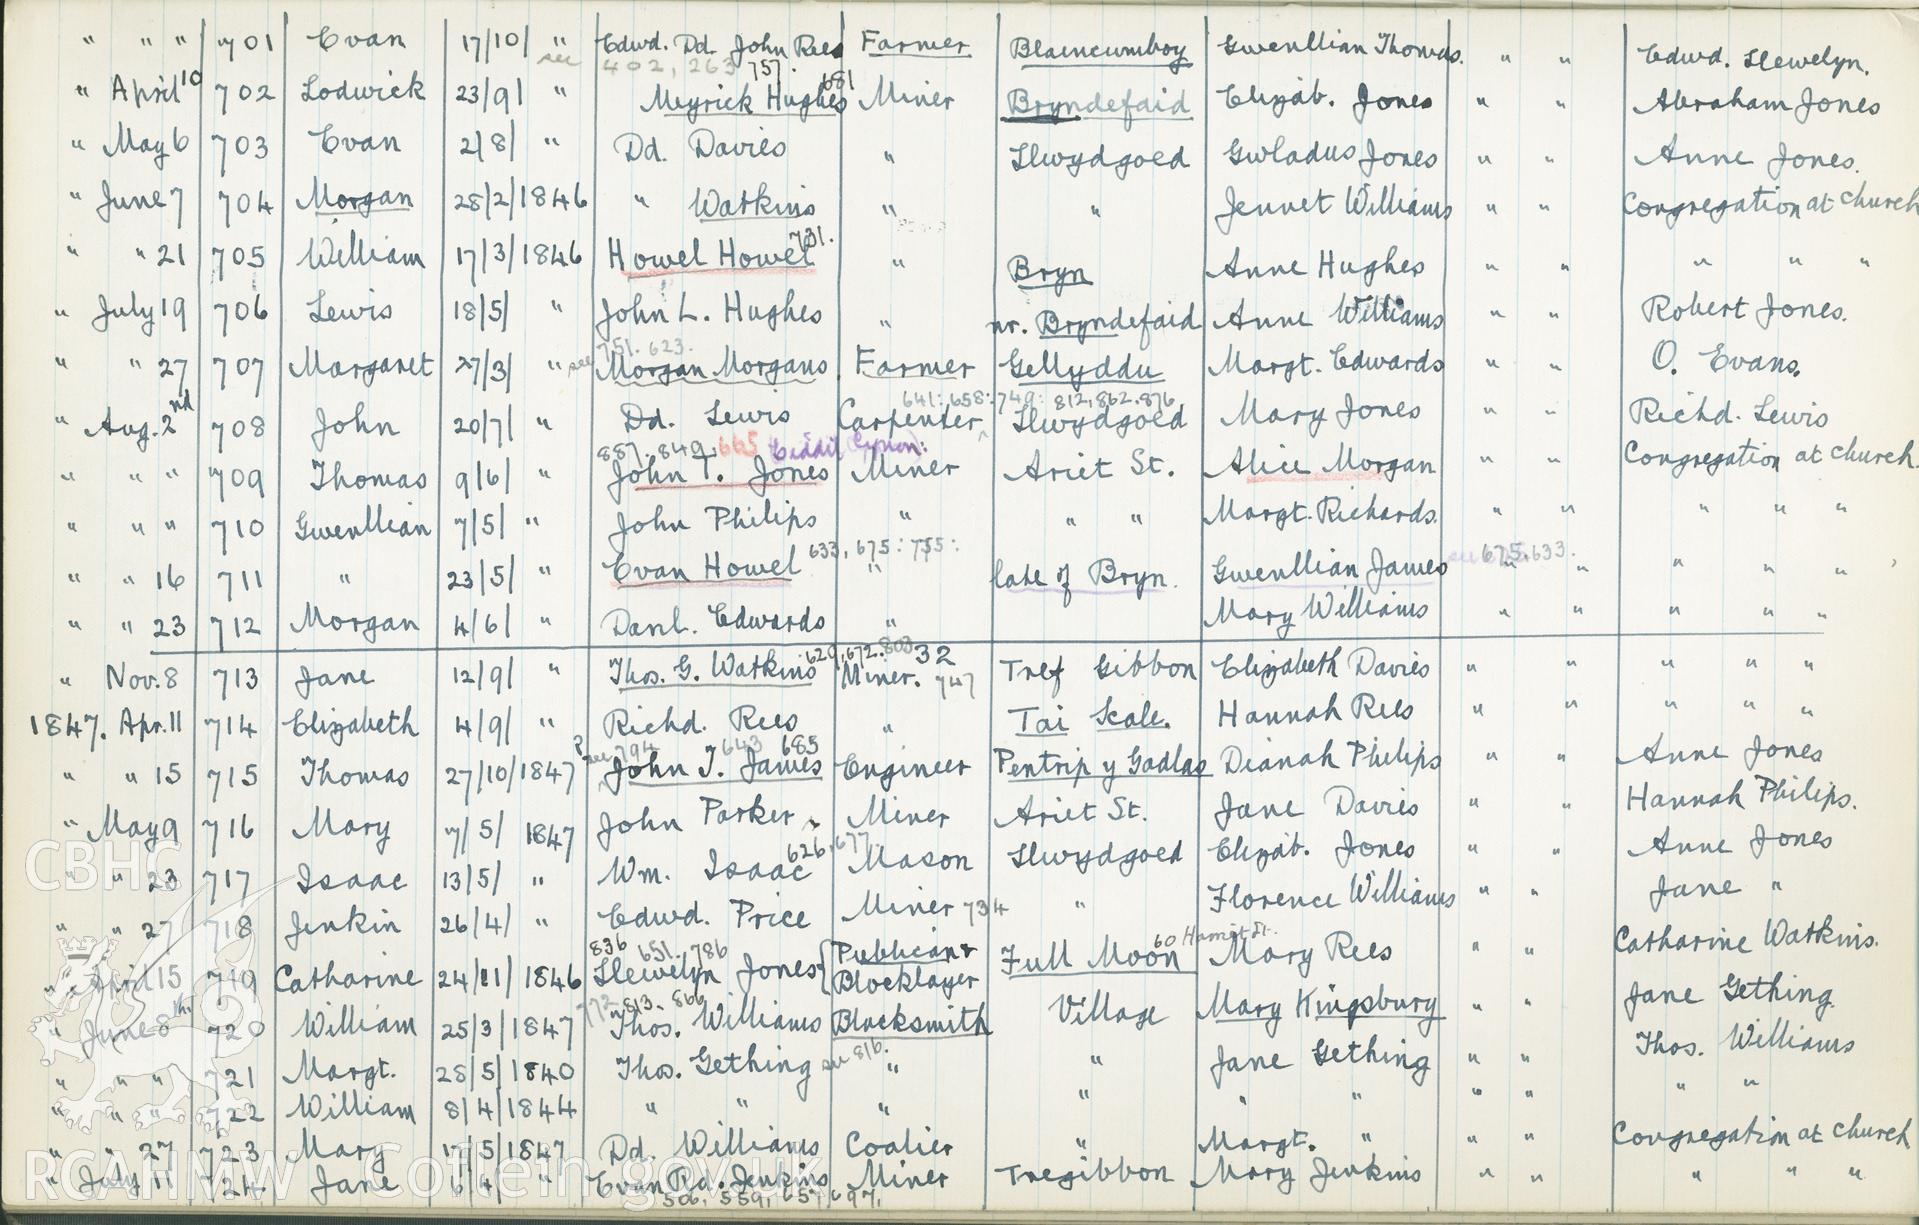 "Baptism Registered" book for Hen Dy Cwrdd, made between April 19th and 28th, 1941, by W. W. Price. Page listing baptisms from 4th March 1846 to 11th July 1847. Donated to the RCAHMW as part of the Digital Dissent Project.